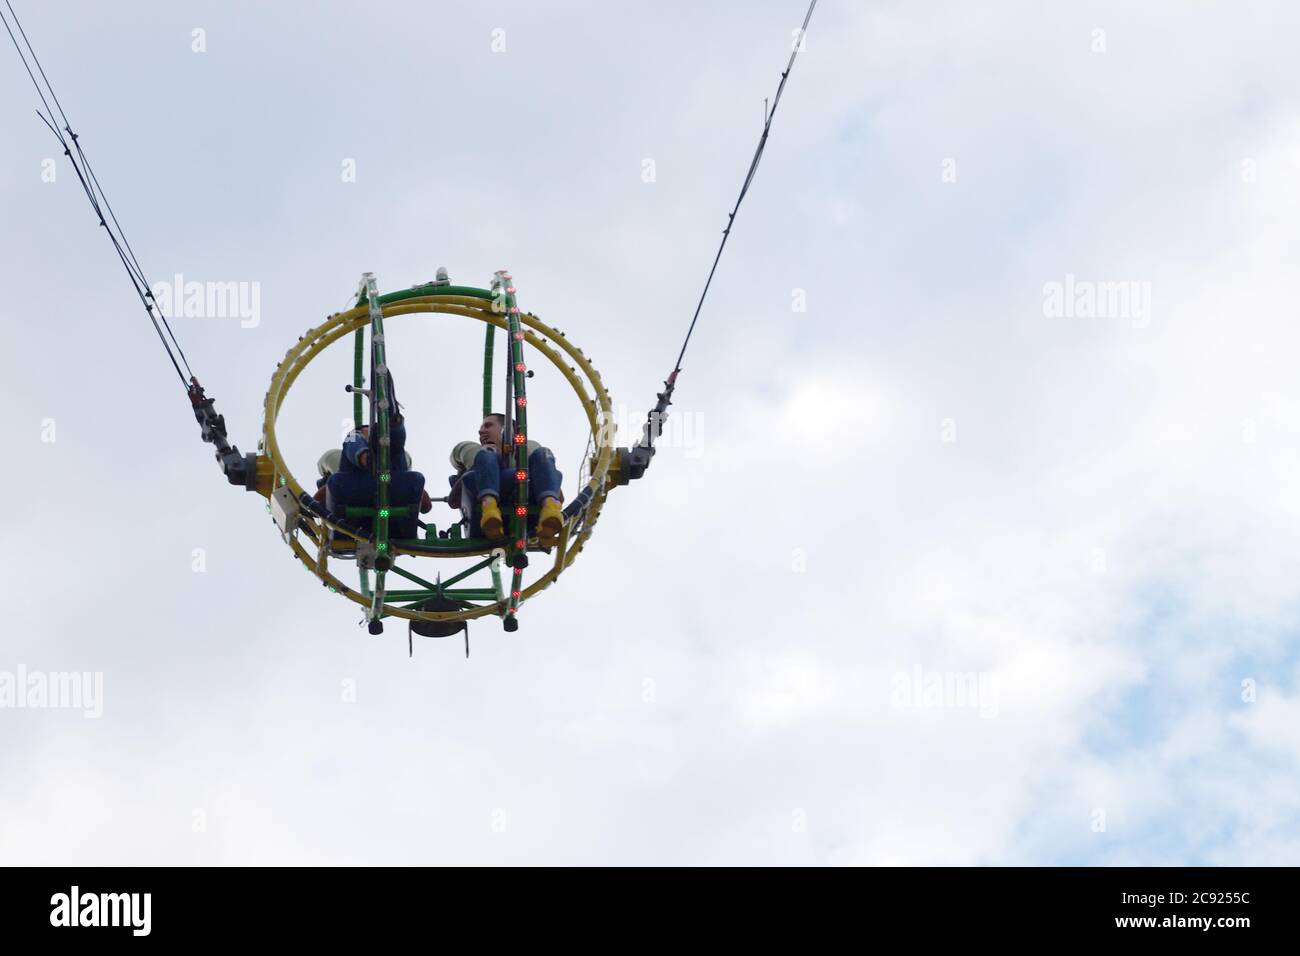 two people on the bungee ride bottom view Stock Photo